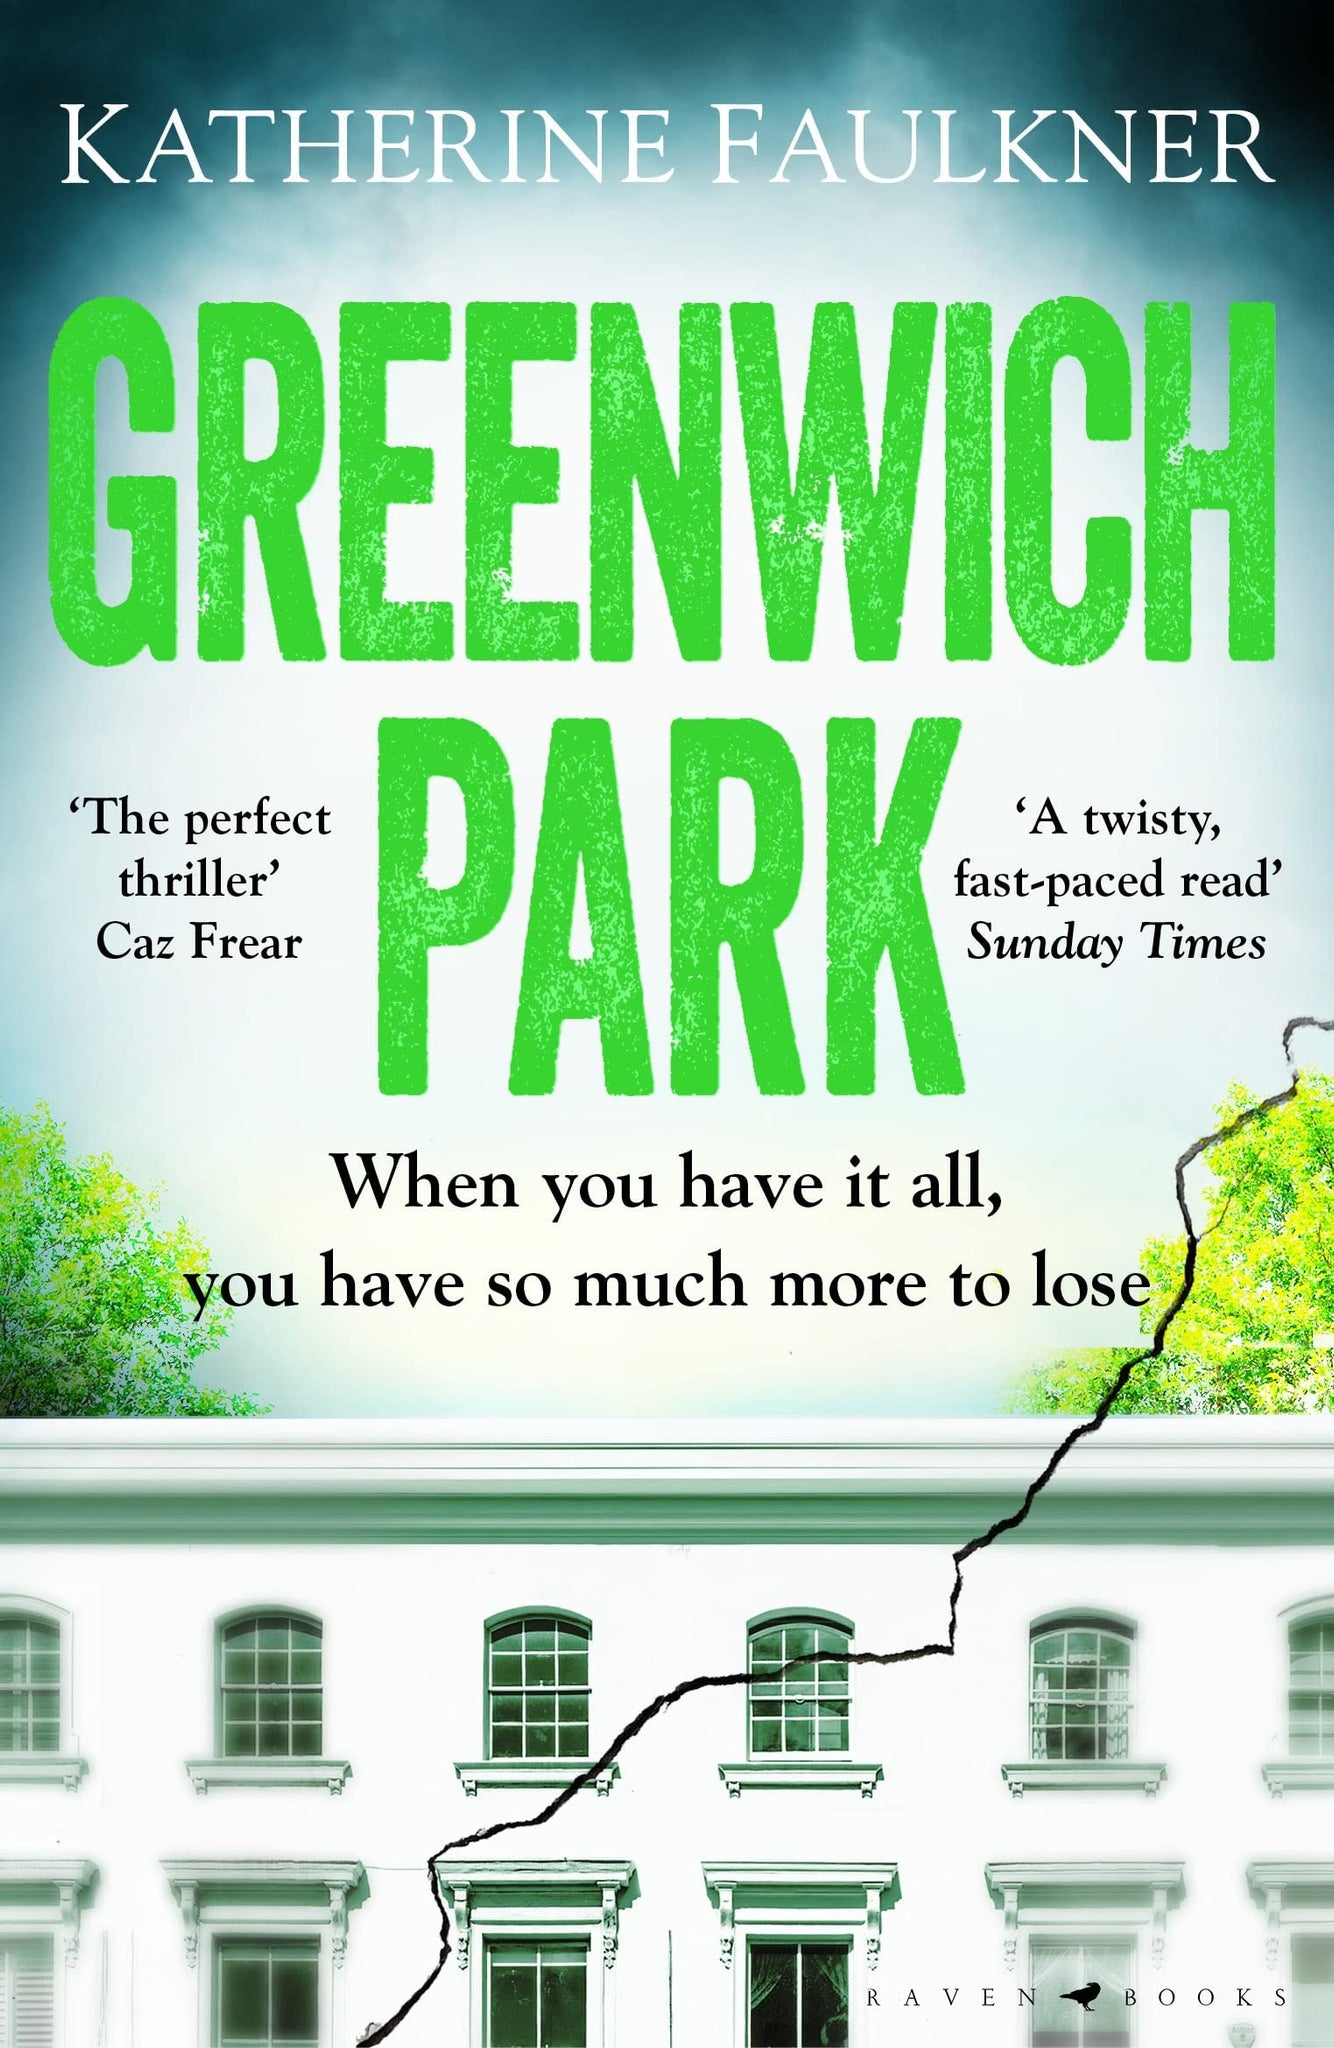 Greenwich Park: A twisty, compulsive debut thriller about friendships, lies and the secrets we keep to protect ourselves - Paperback